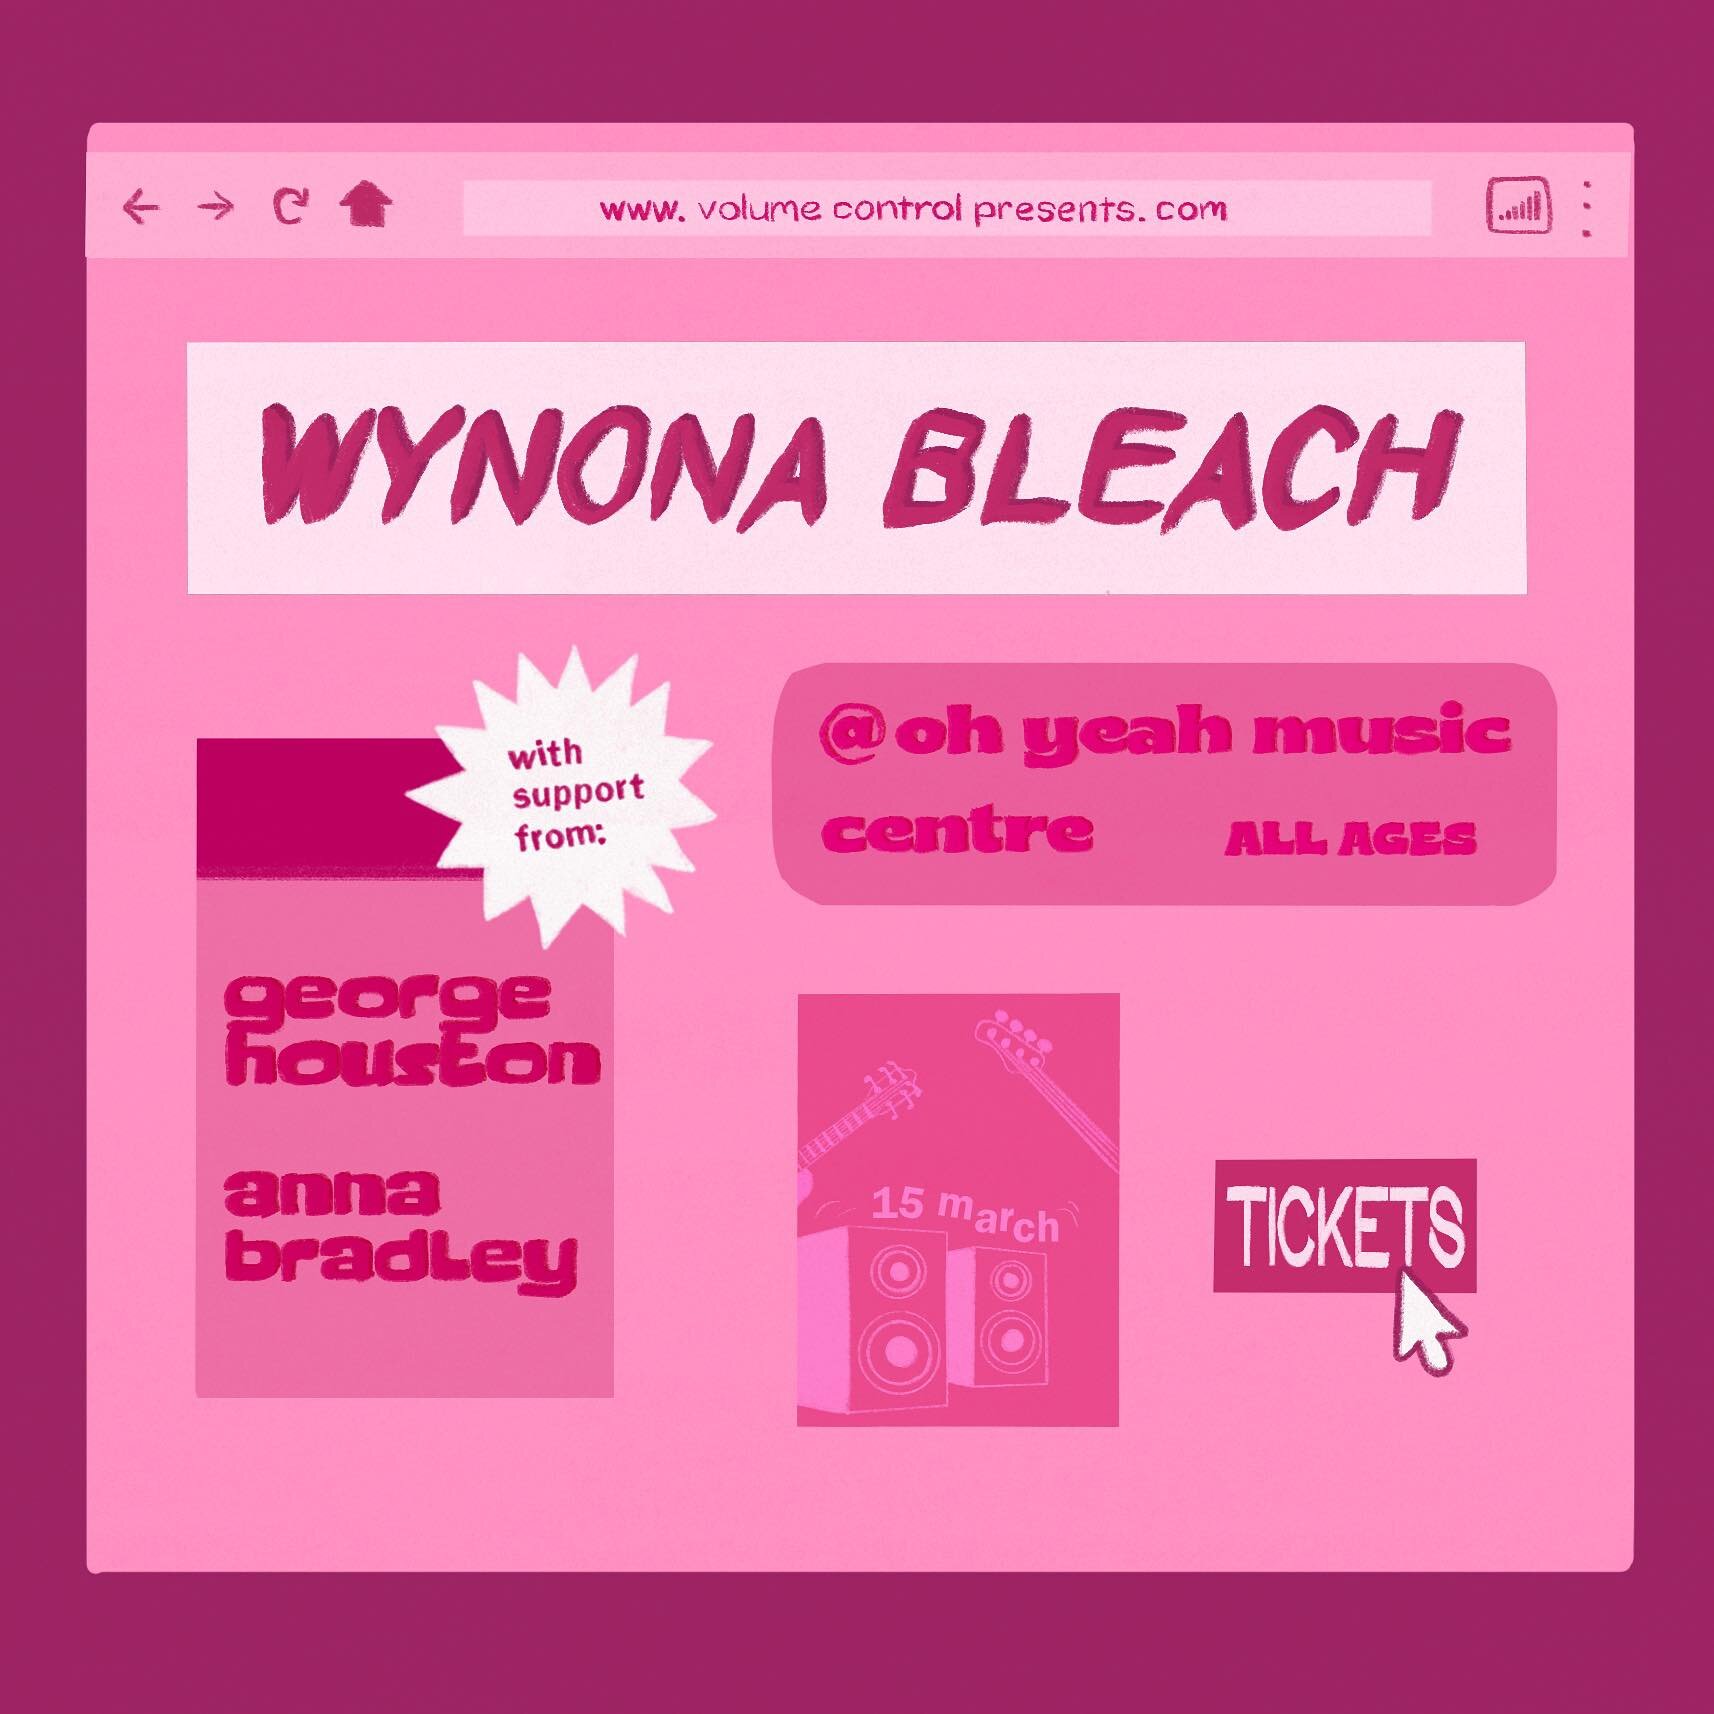 ⚡️GIG ANNOUNCEMENT⚡️

Volume Control are kicking off gig season with a fresh lineup, this is not one to miss out on. Headlining, we have Wynona Bleach, dreamy alt-rock shoegazers dominating the local scene, set to take the stage.  Next up, George Hou